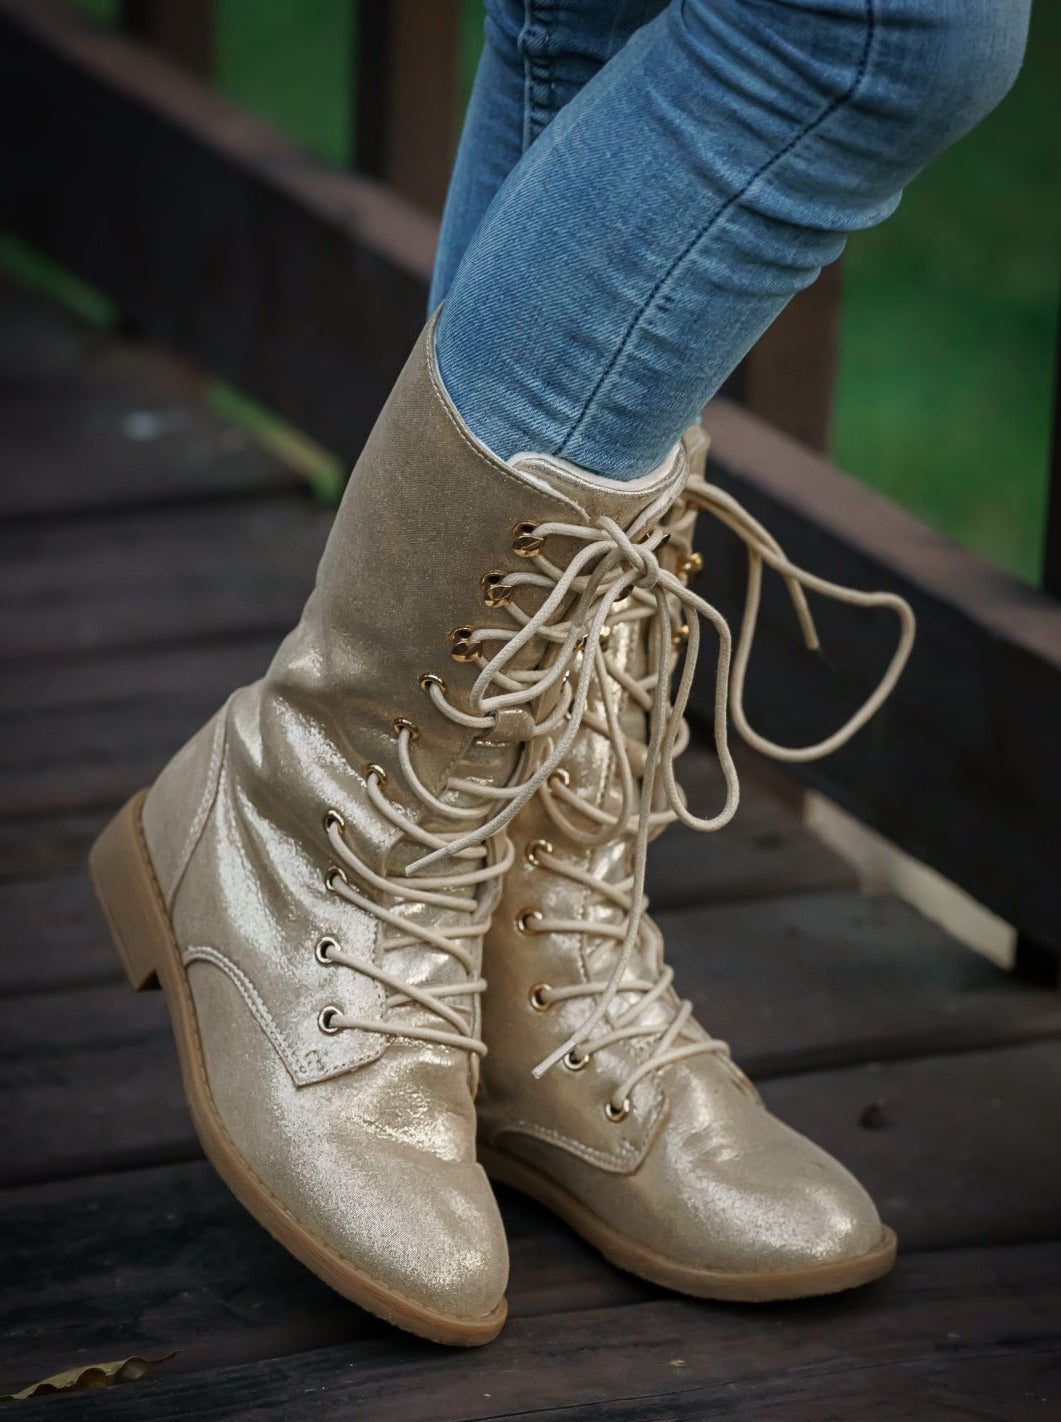 Girls Metallic Lace Up Combat Boots By Liv and Mia